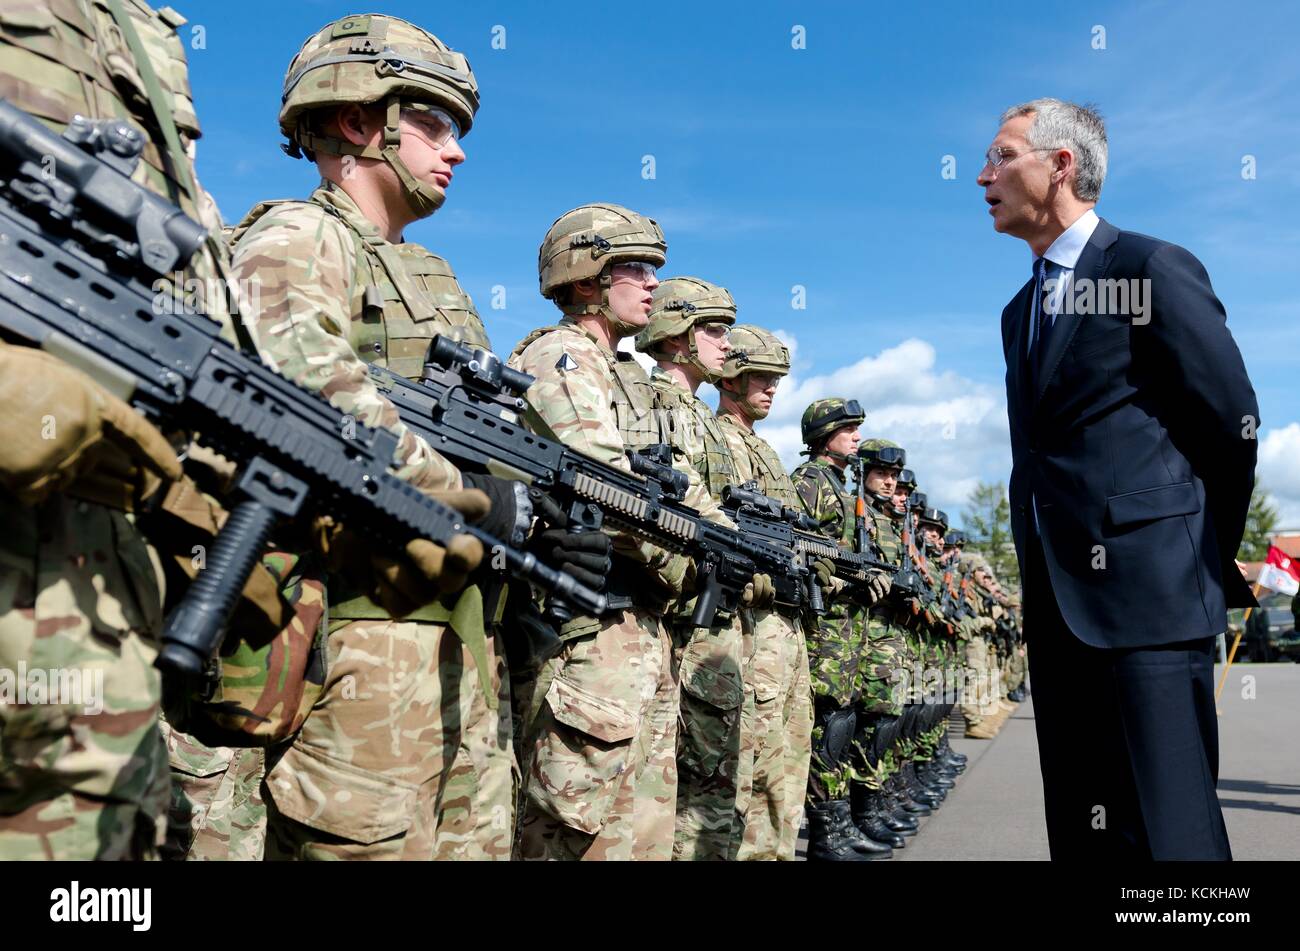 NATO Secretary General Jens Stoltenberg speaks to British soldiers deployed in support of an Enhanced Forward Presence mission August 25, 2017 in Bemowo Piskie, Poland.    (photo by John W. Strickland  via Planetpix) Stock Photo